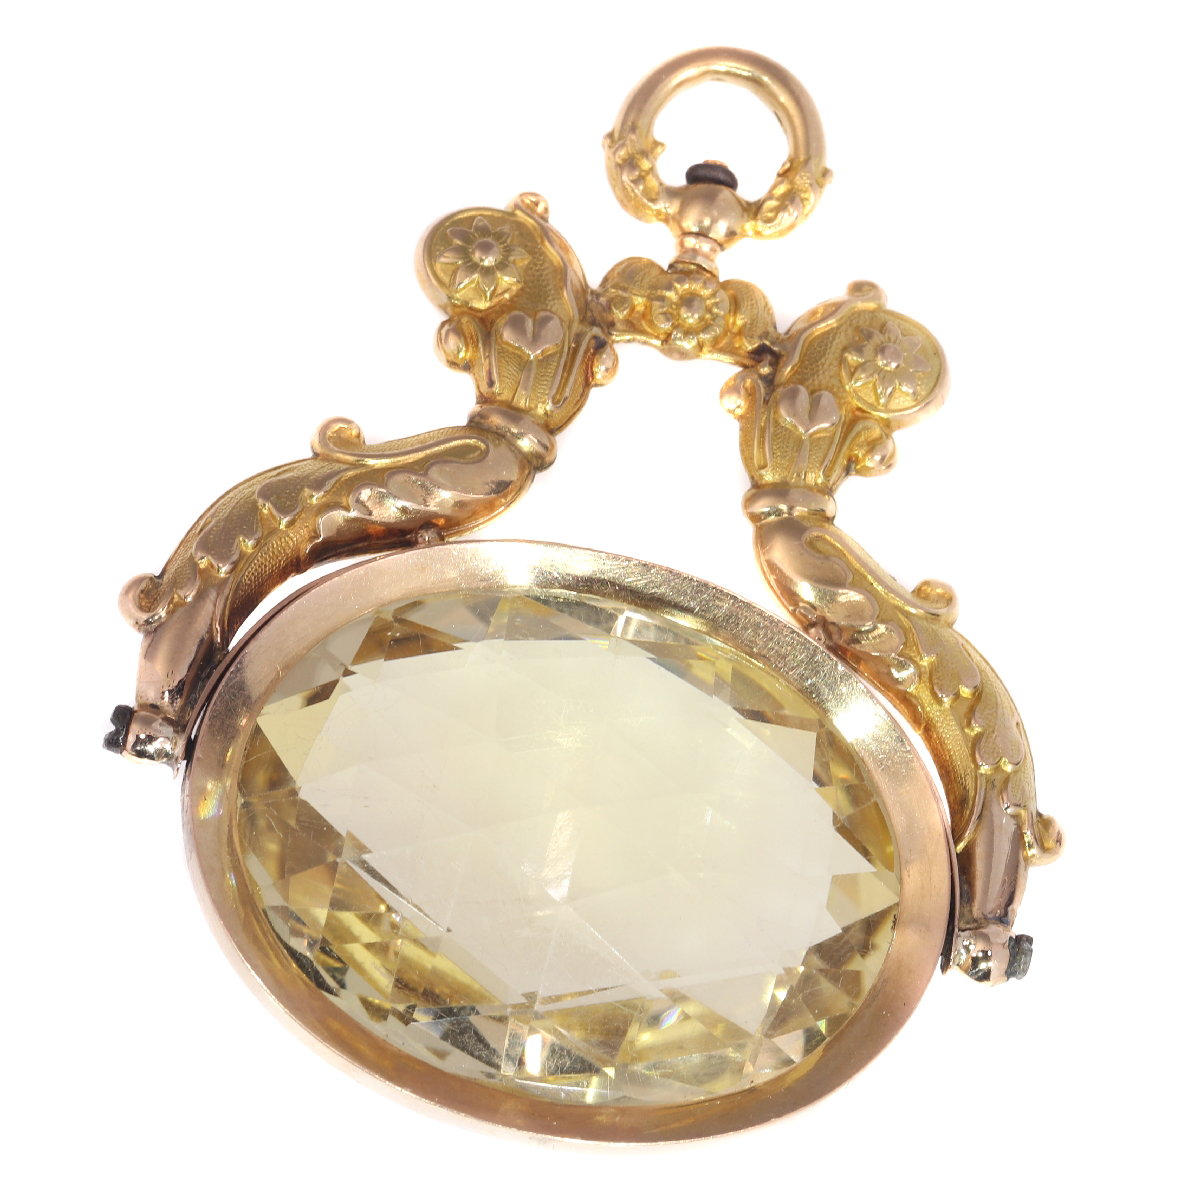 1820's Elegance: Belgian Red Gold Pendant with 105ct Citrine